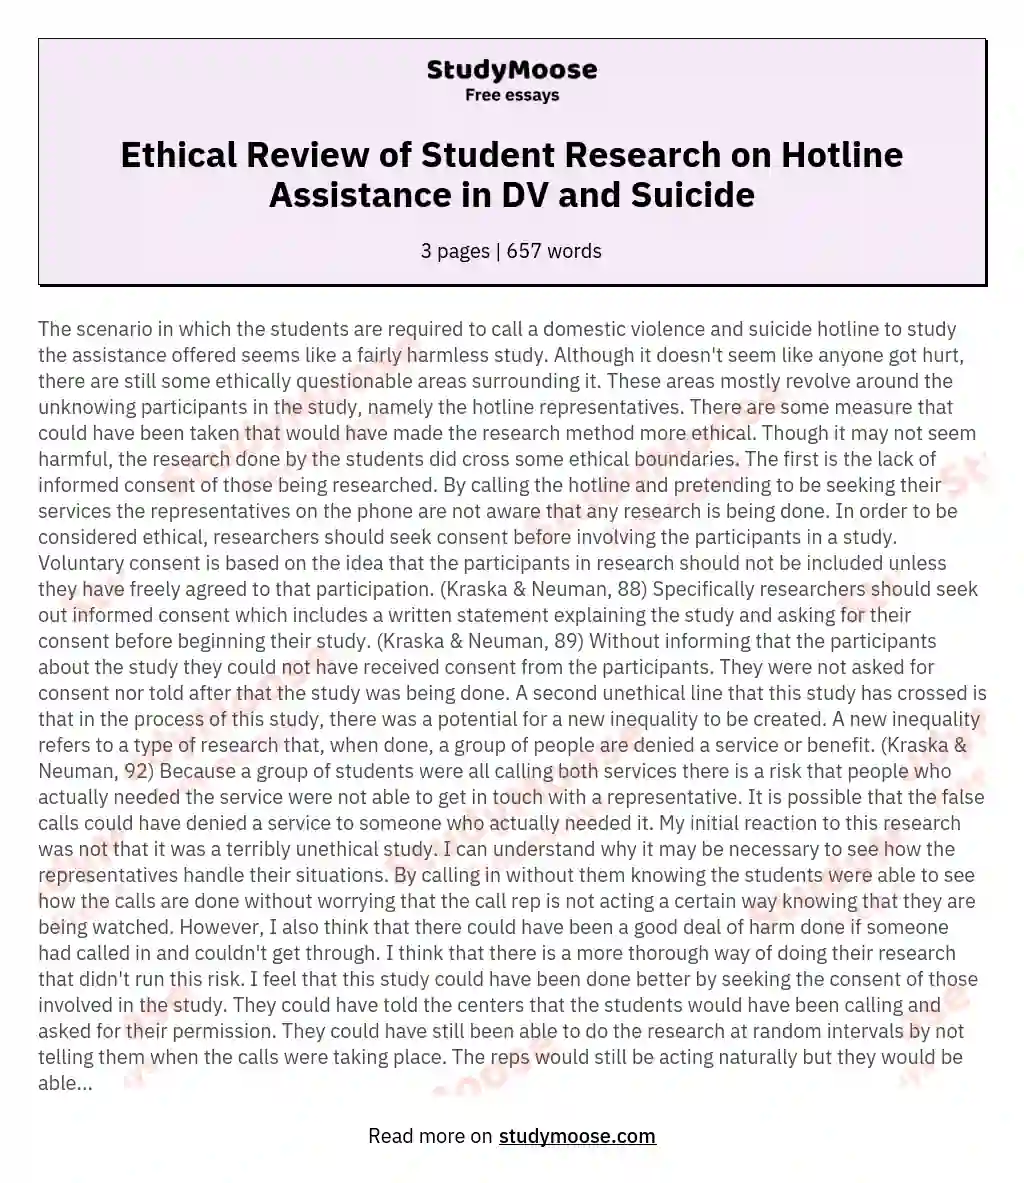 Ethical Review of Student Research on Hotline Assistance in DV and Suicide essay